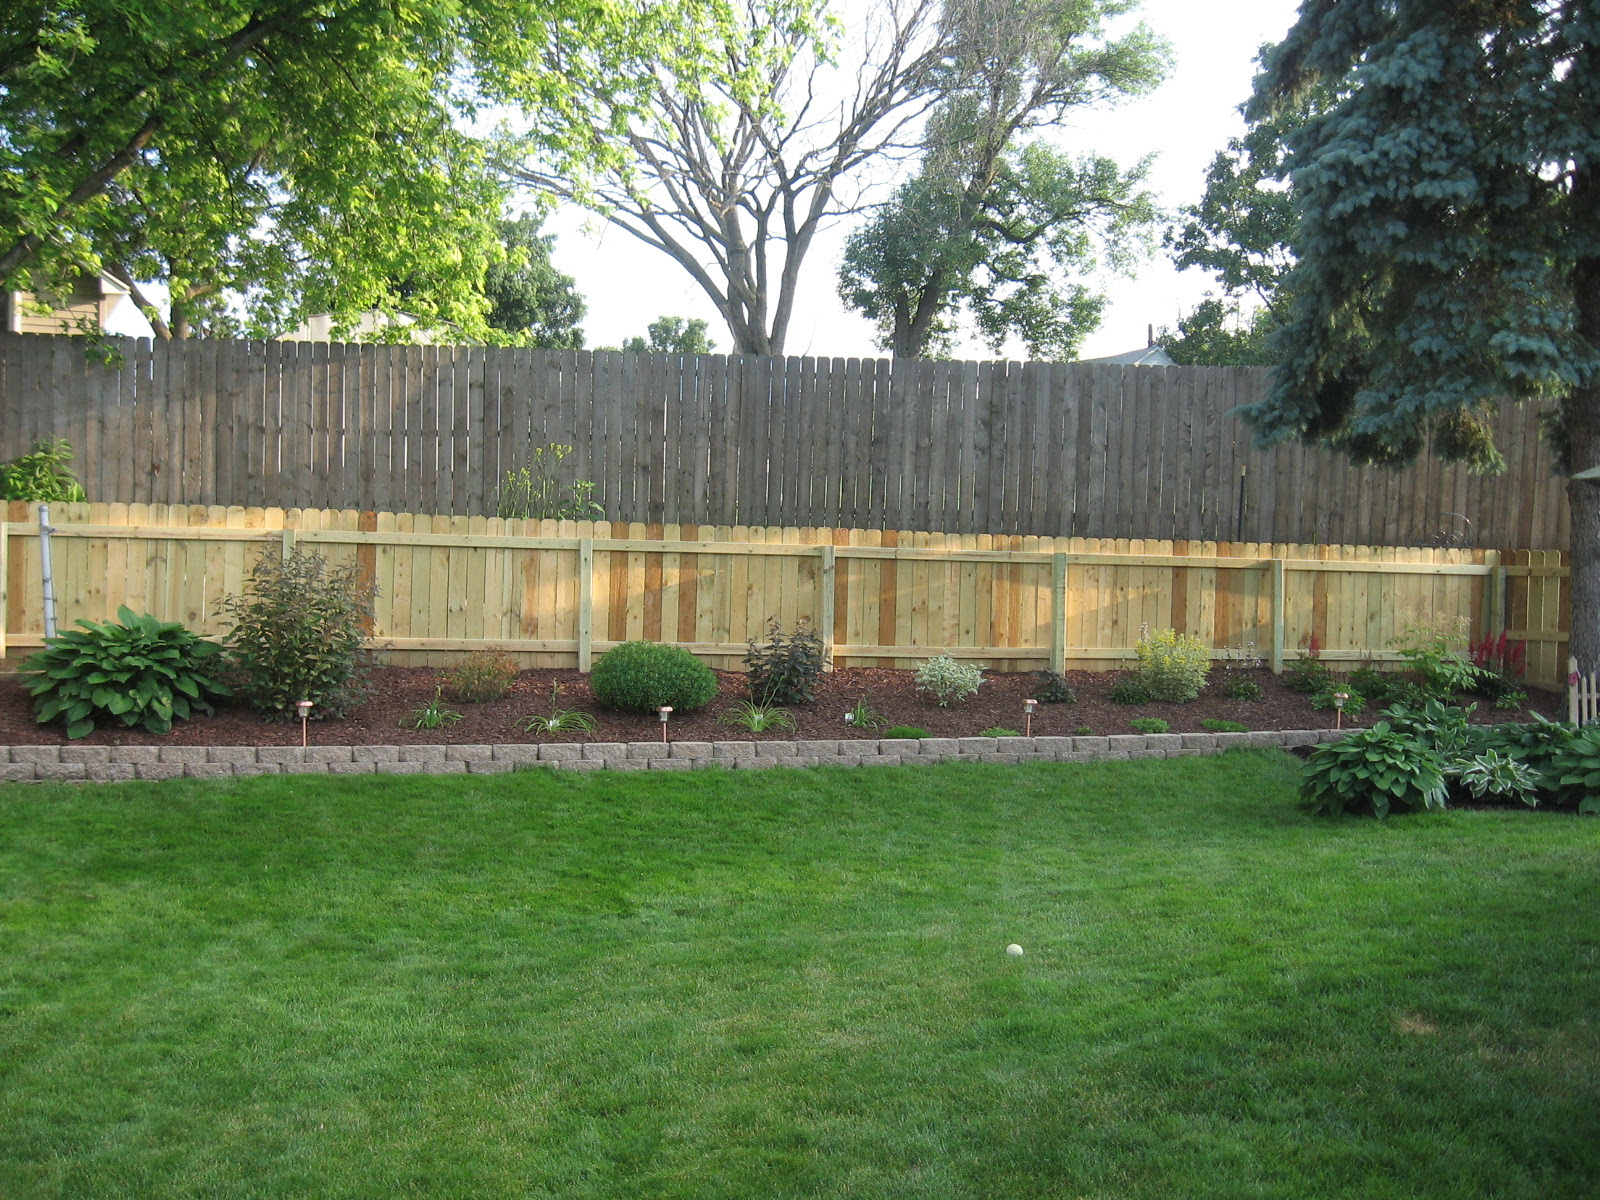 Privacy Fence Ideas For Backyard Large And Beautiful Photos Photo To Select Privacy Fence Ideas For Backyard Design Your Home